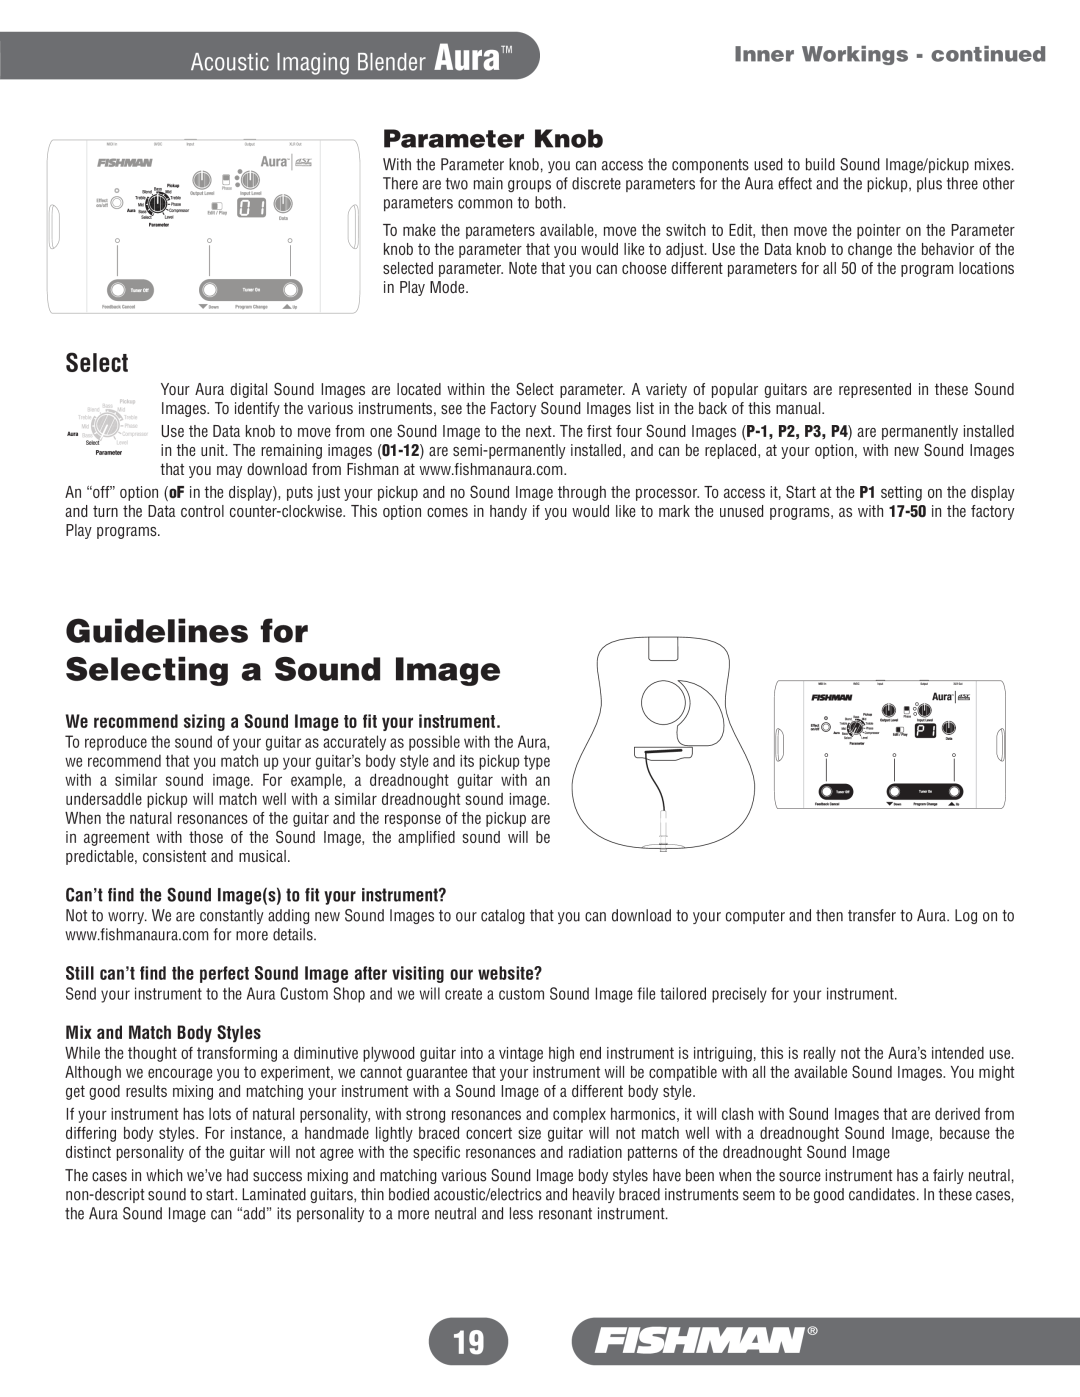 Fishman manual Guidelines for Selecting a Sound Image, Parameter Knob, Acoustic Imaging Blender Aura 